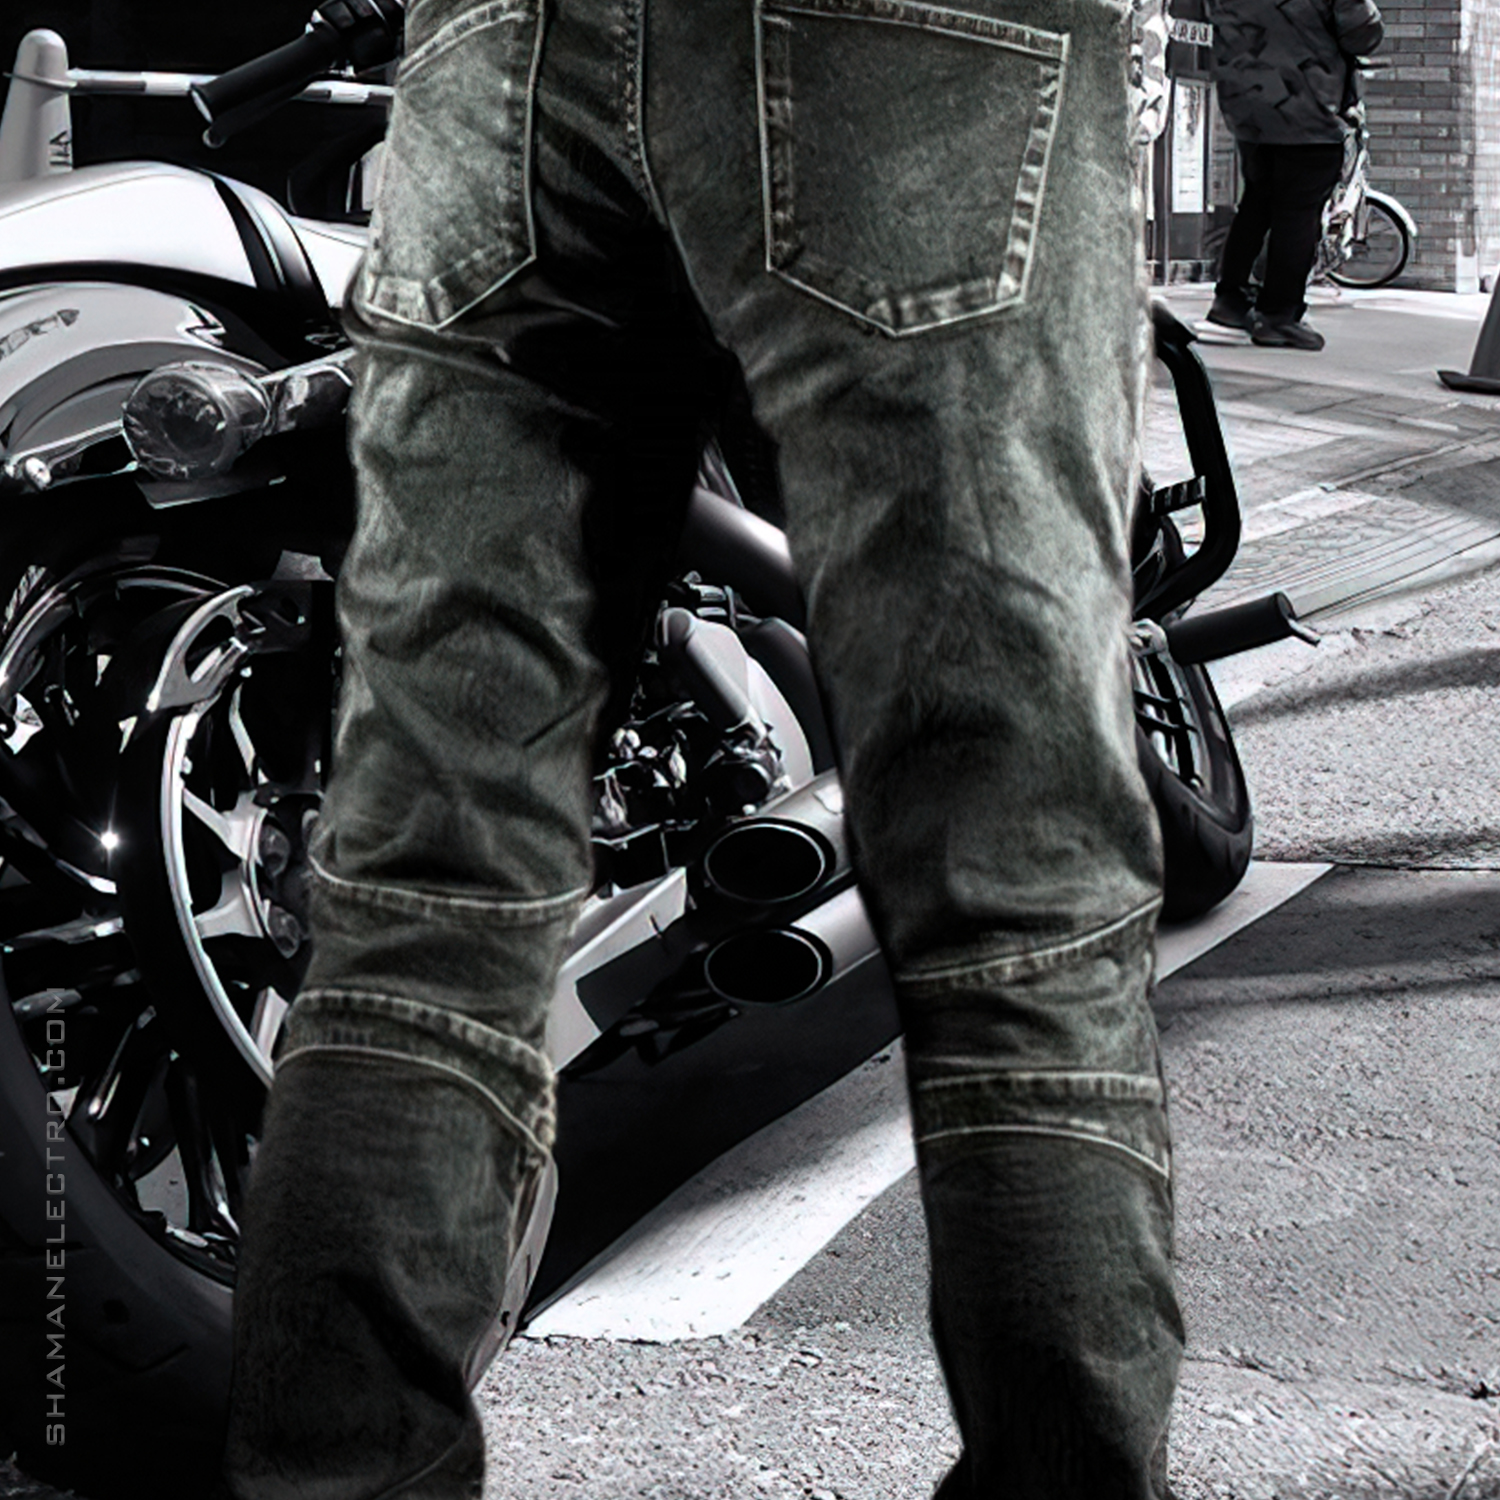 LOMENG Motorcycle Riding Pants Motocross Ricing Jeans India | Ubuy